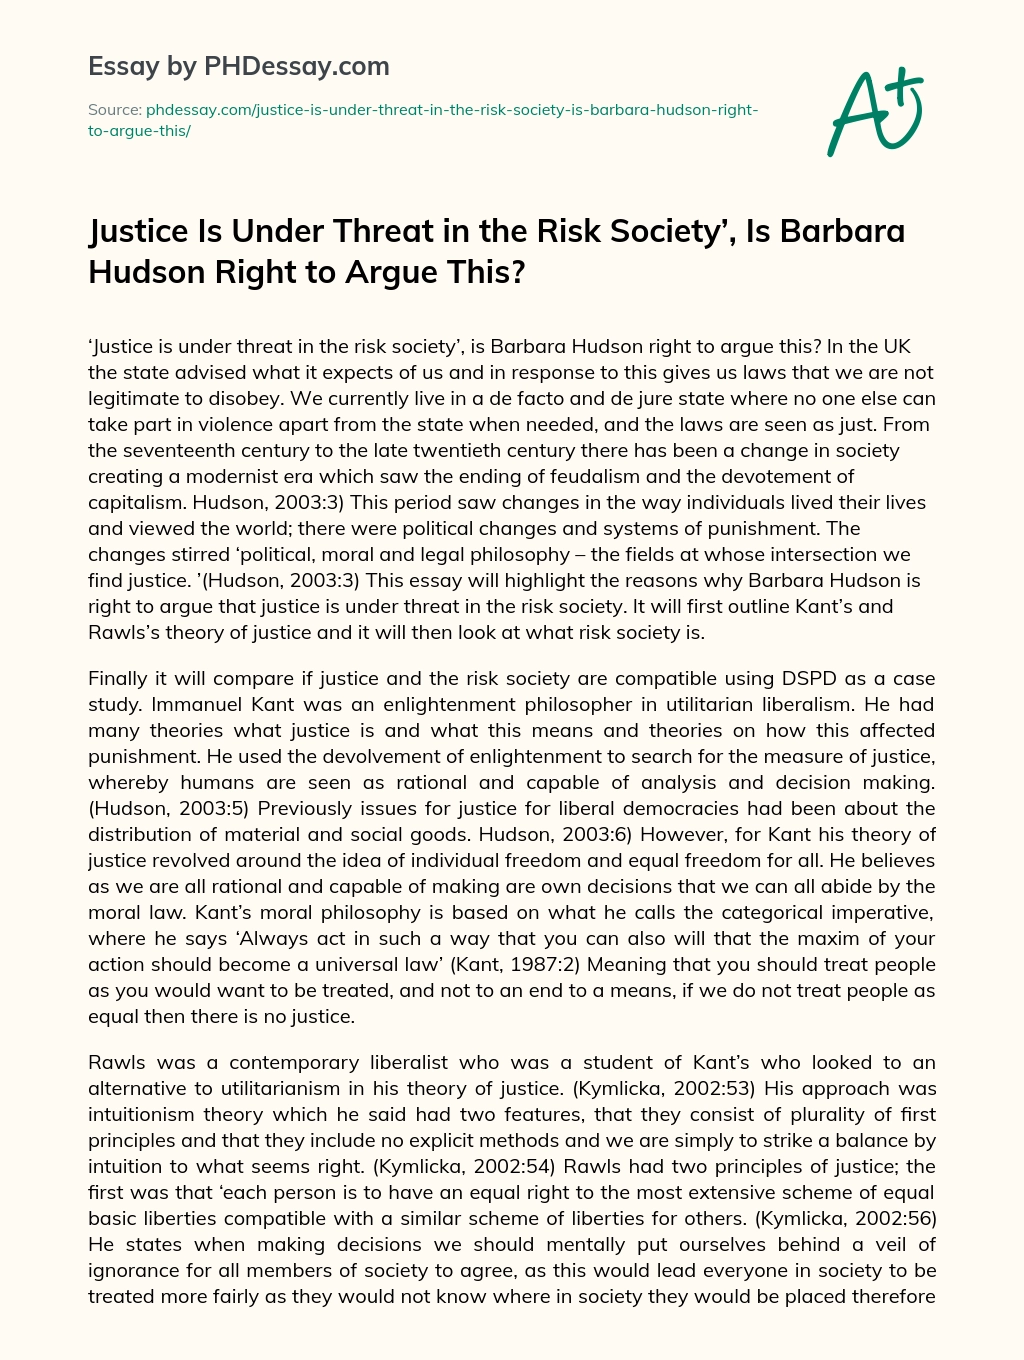 Justice Is Under Threat in the Risk Society’, Is Barbara Hudson Right to Argue This? essay